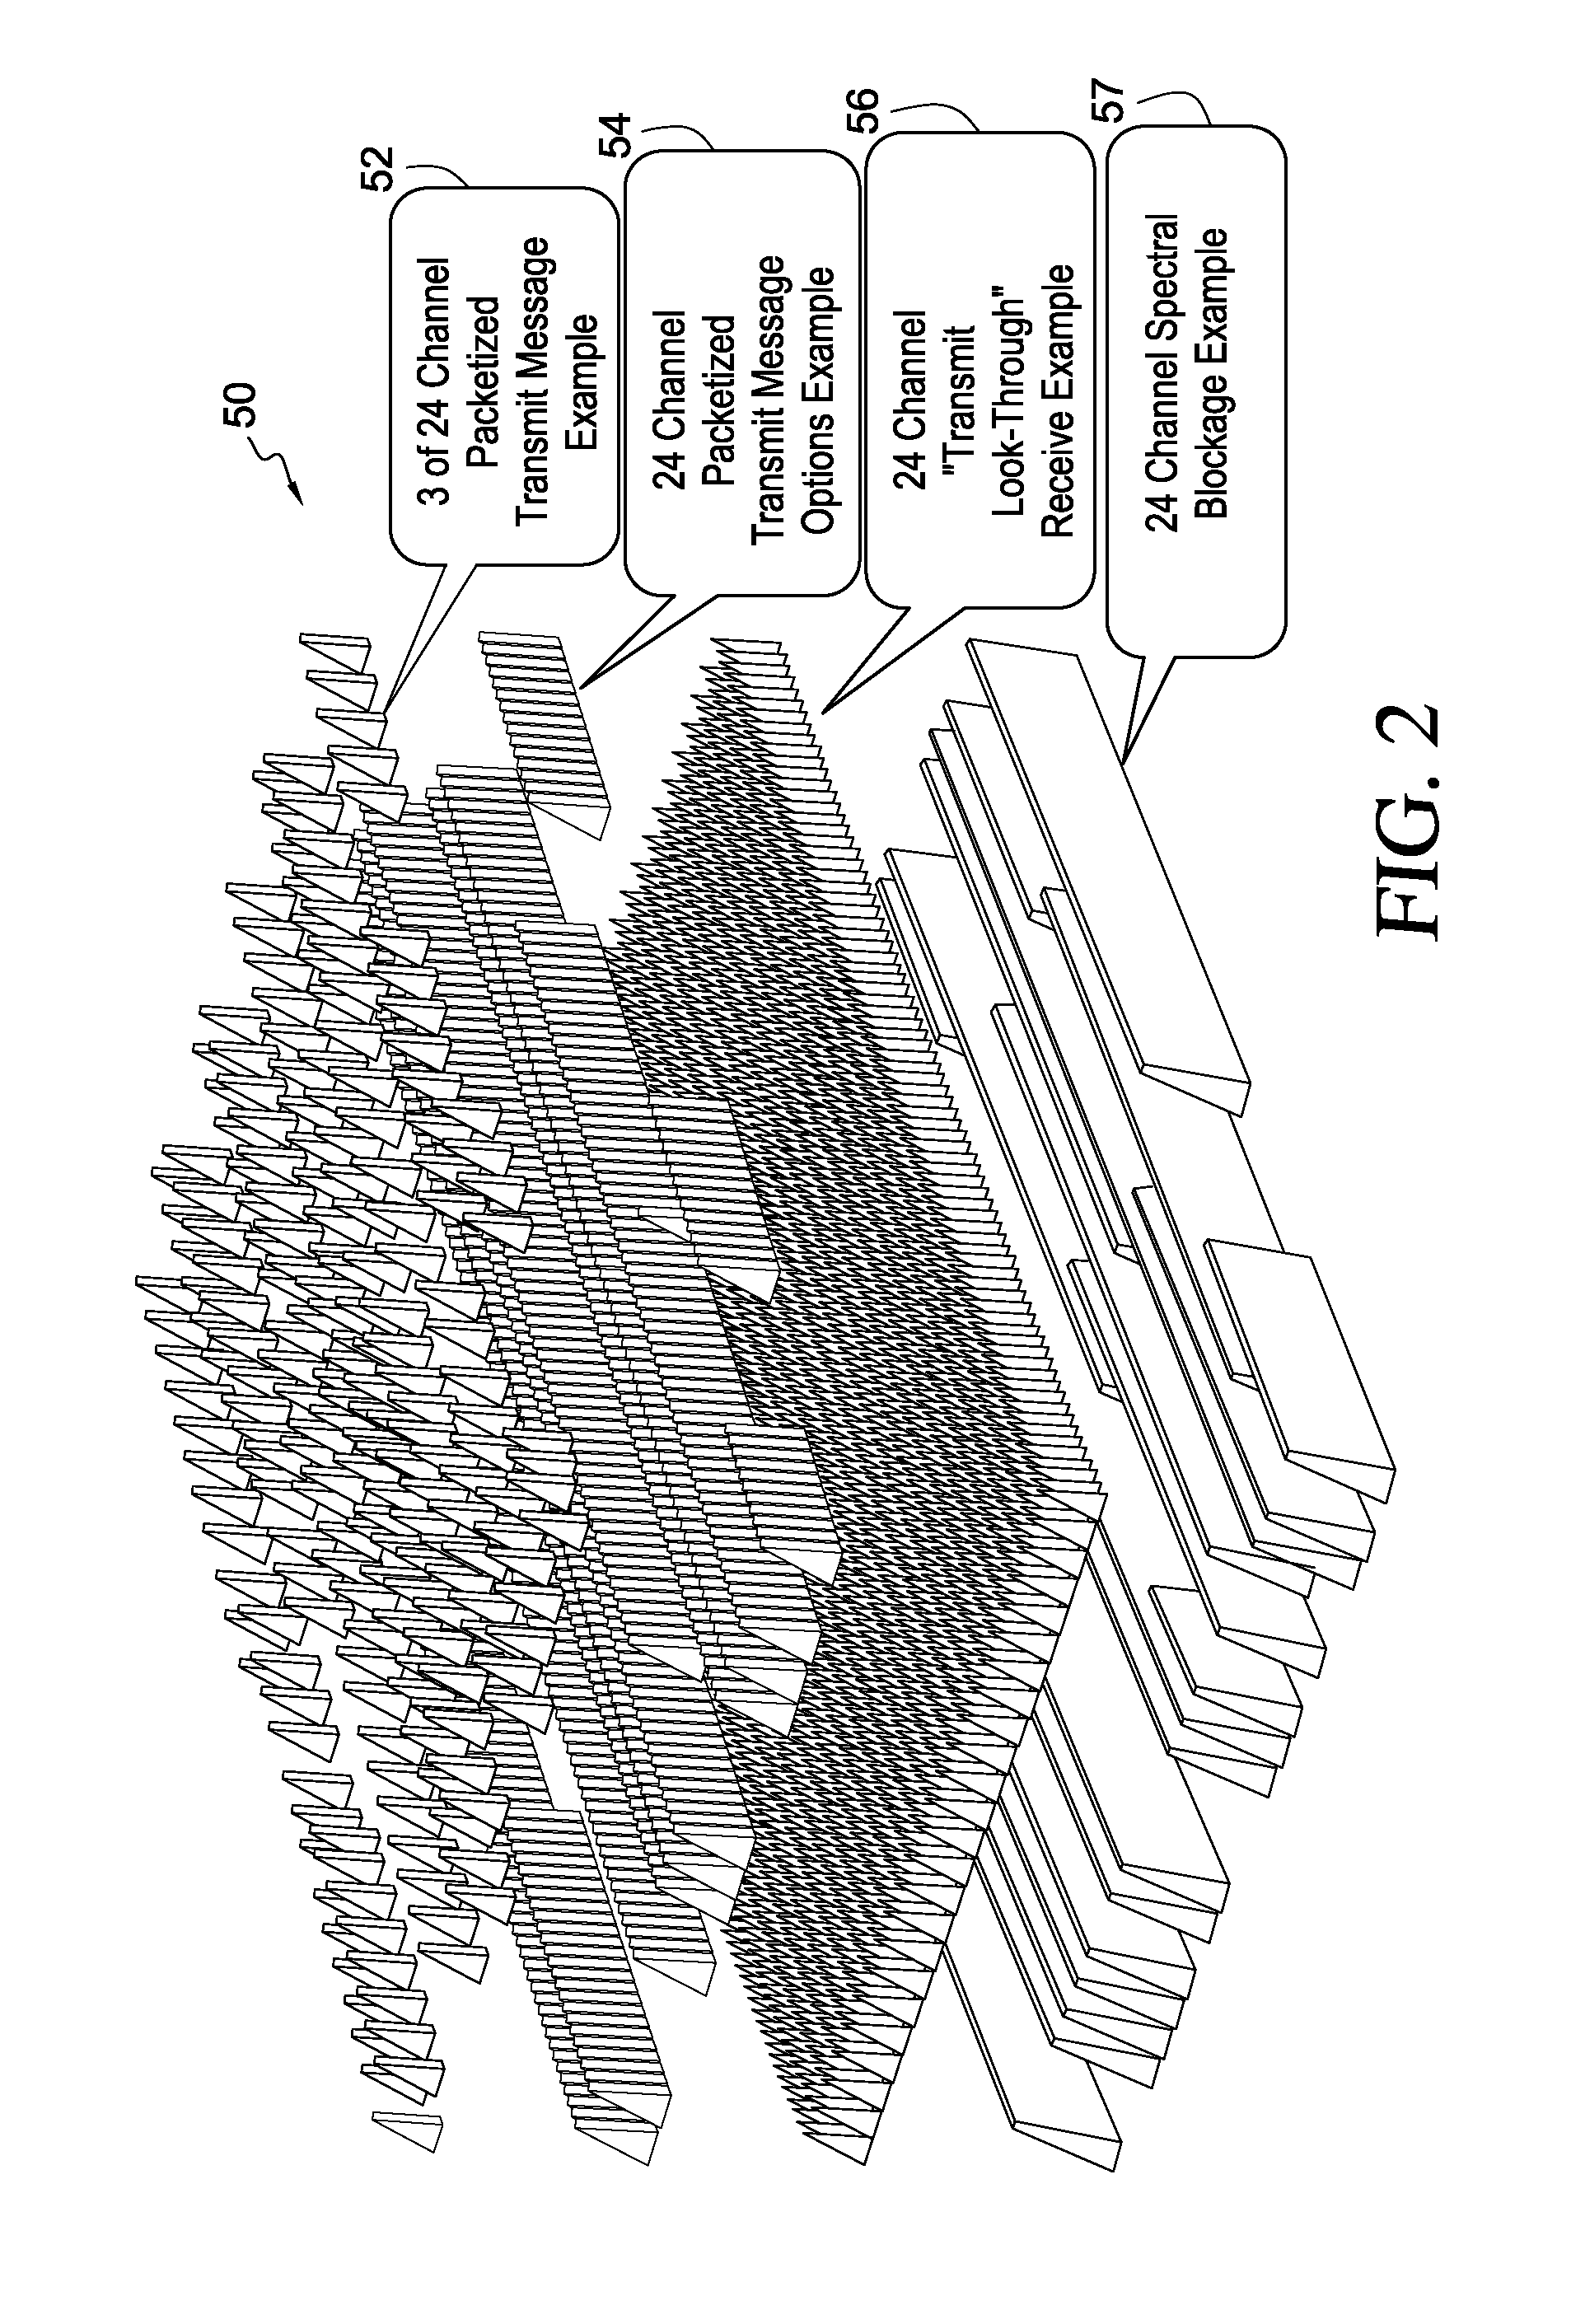 Multi-signal, software-defined and staring cognitive communications system